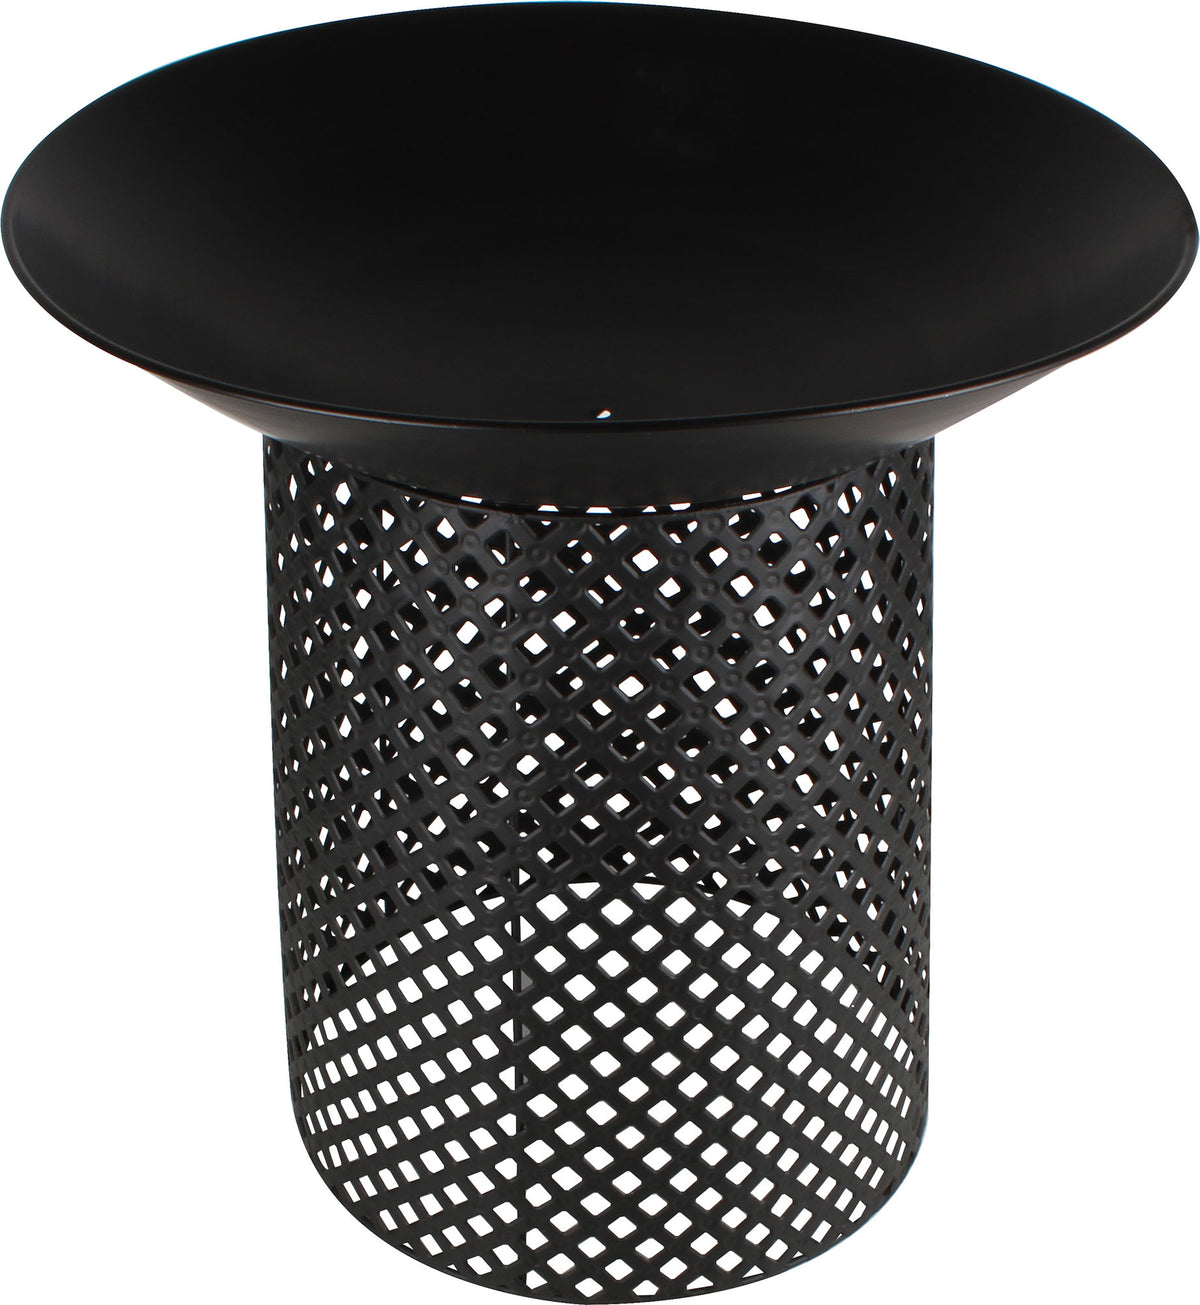 56cm BLACK STEEL FIRE PIT WITH STAND